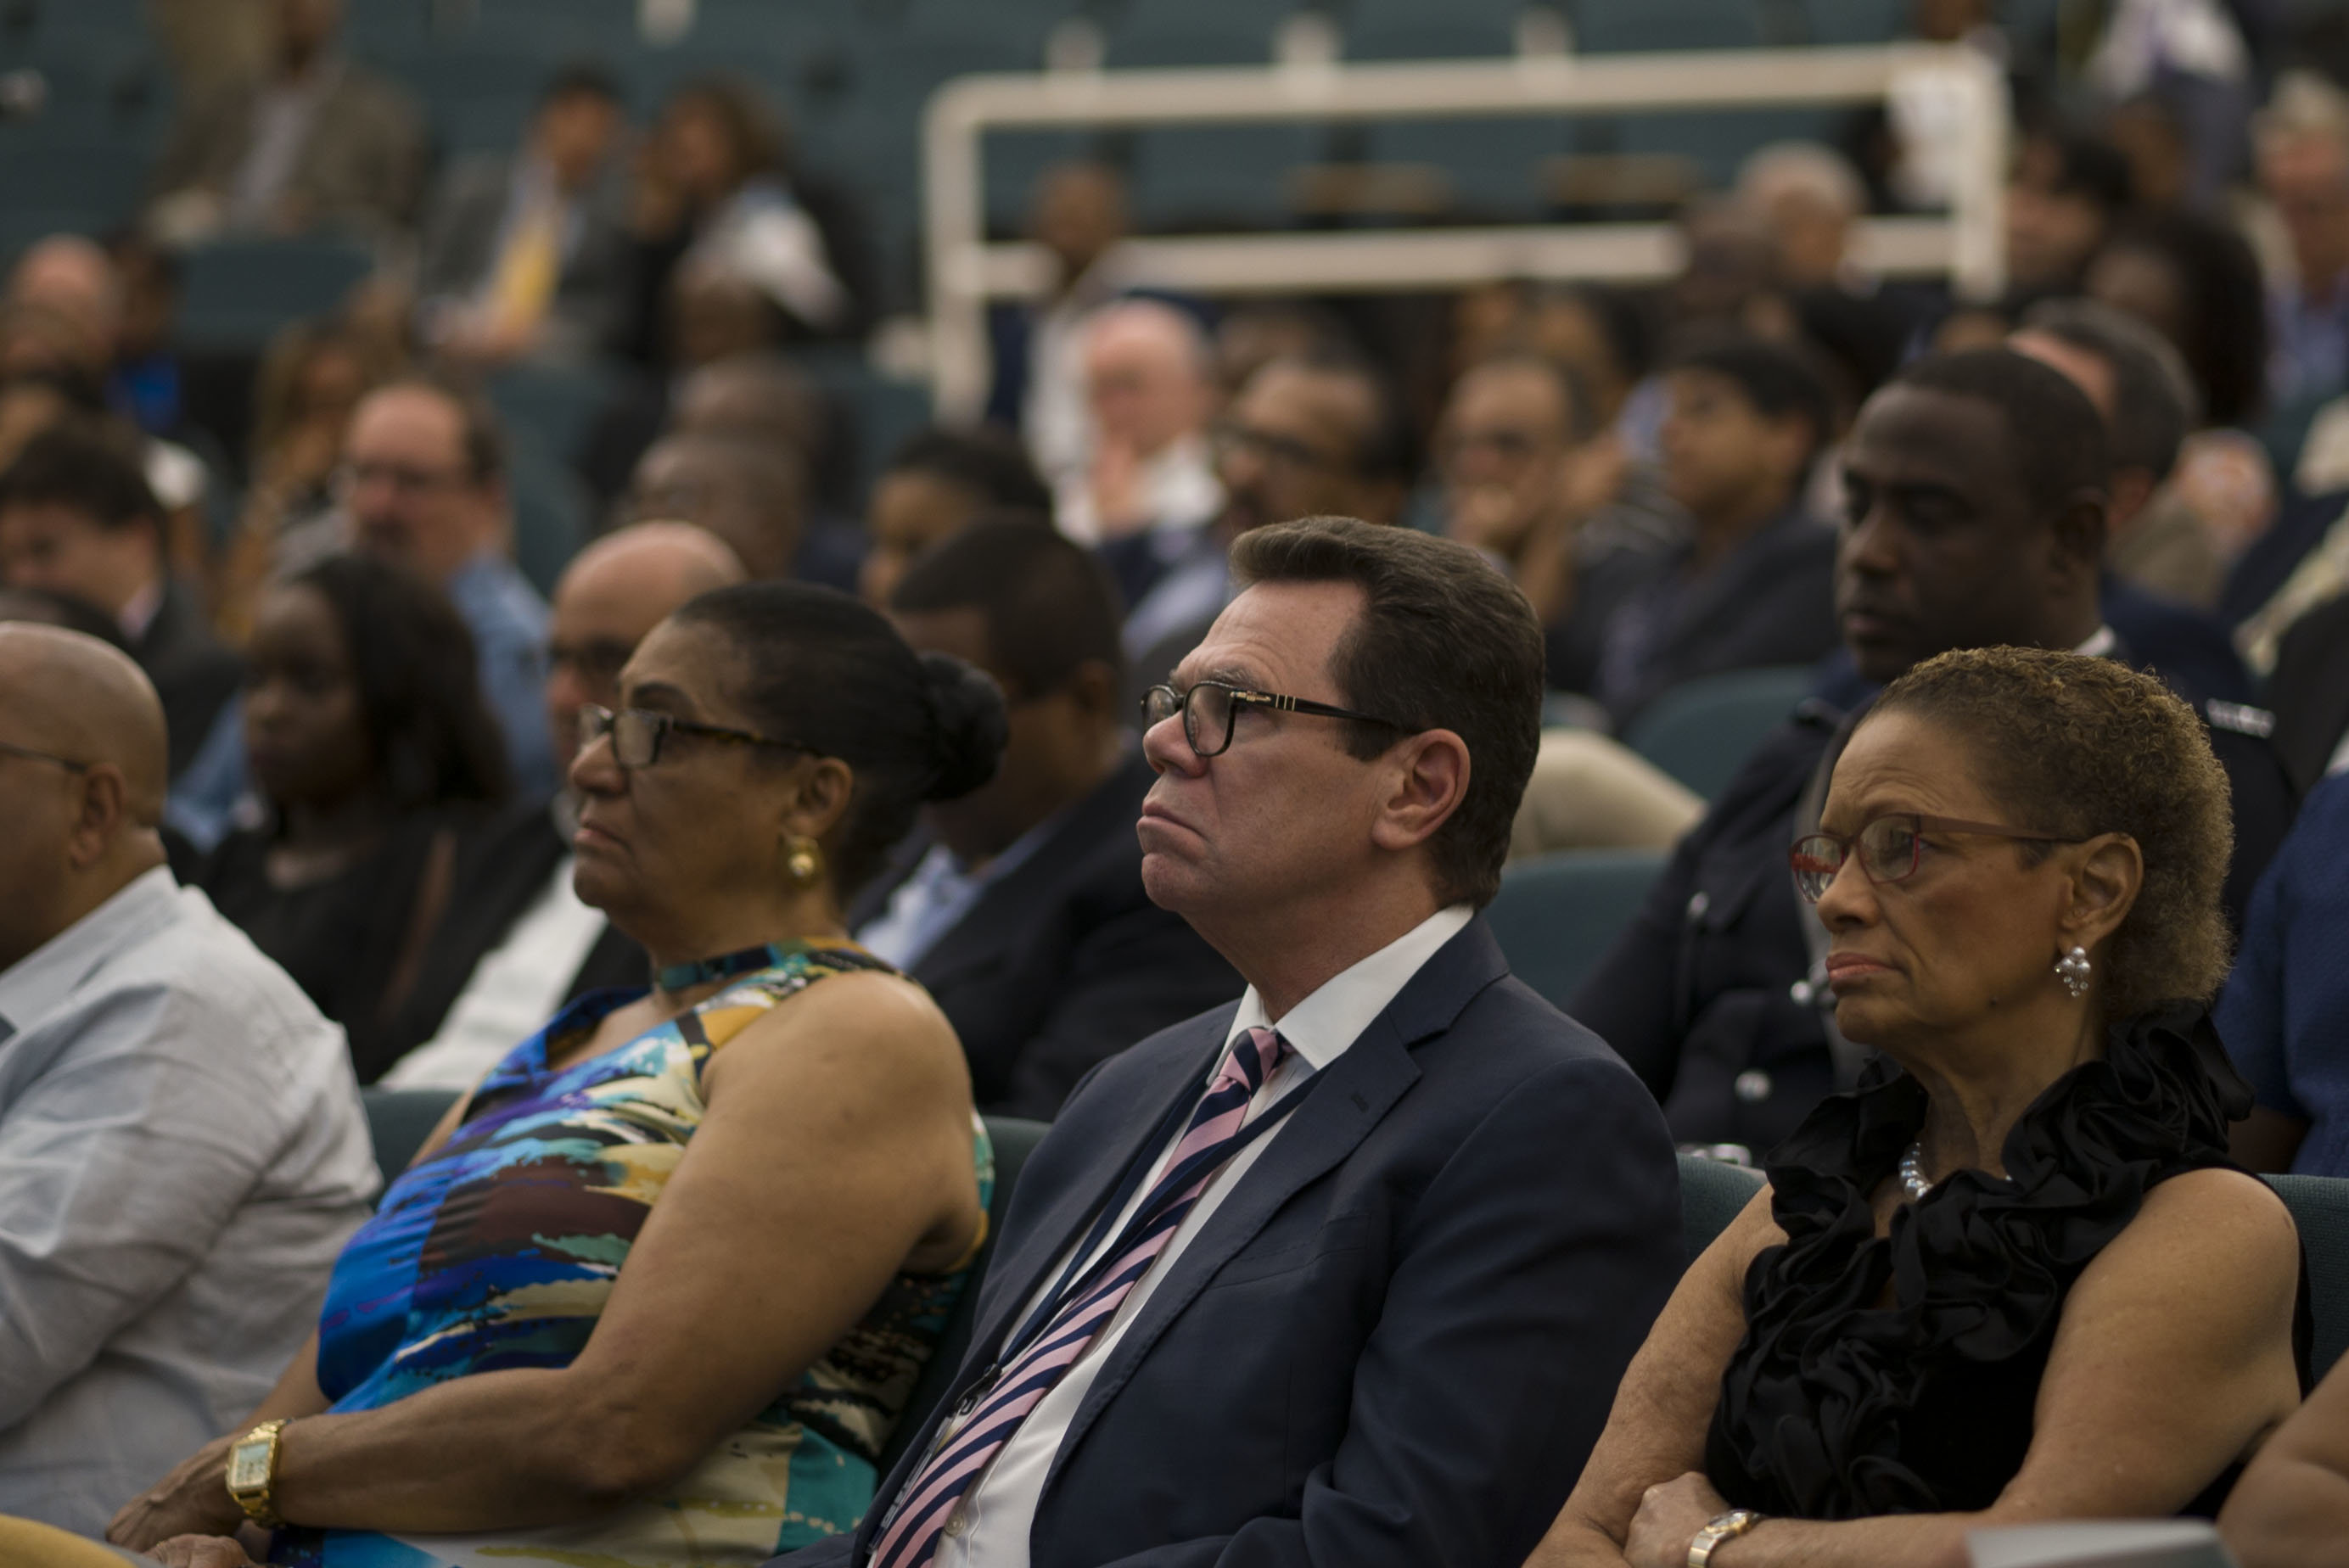 (L-R) Her Excellency Dr. Cécile La Grenade, Governor General, Grenada; Dr. Wm. Warren Smith, President, Caribbean Development Bank and his wife Dr. Anne-Marie Irvine, listen to Mark Pelling as he delivers the 9th William G. Demas Memorial Lecture on May 29 in Grenada.